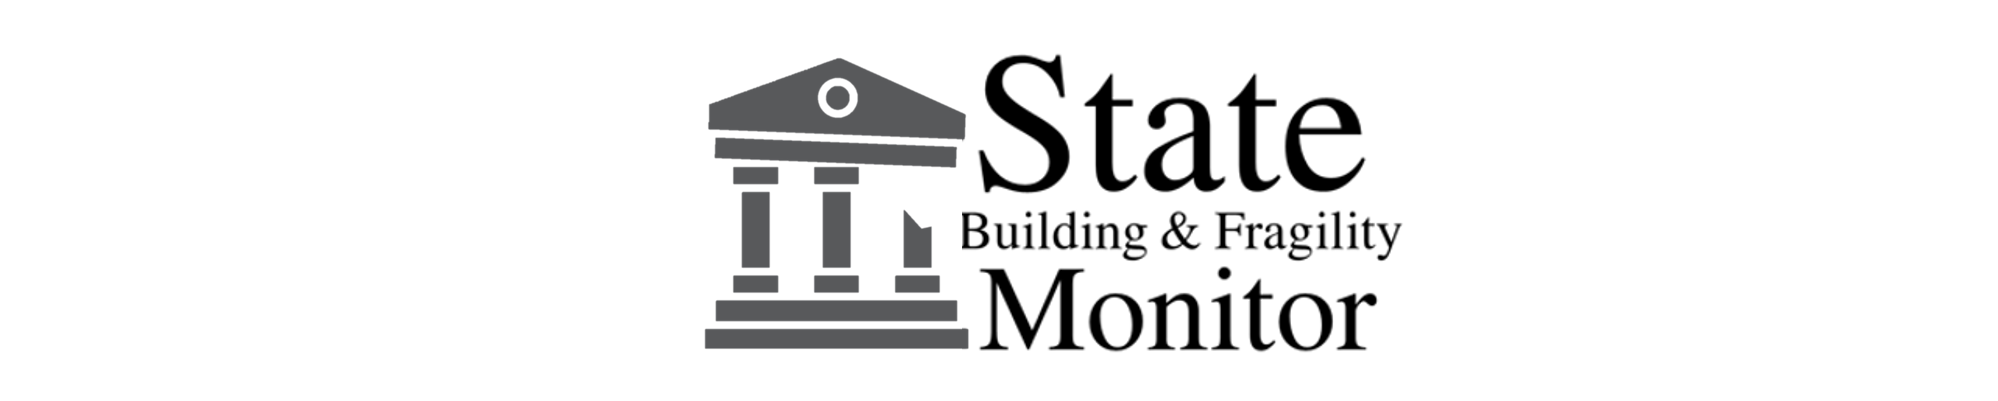 State Building & State Fragility Monitor